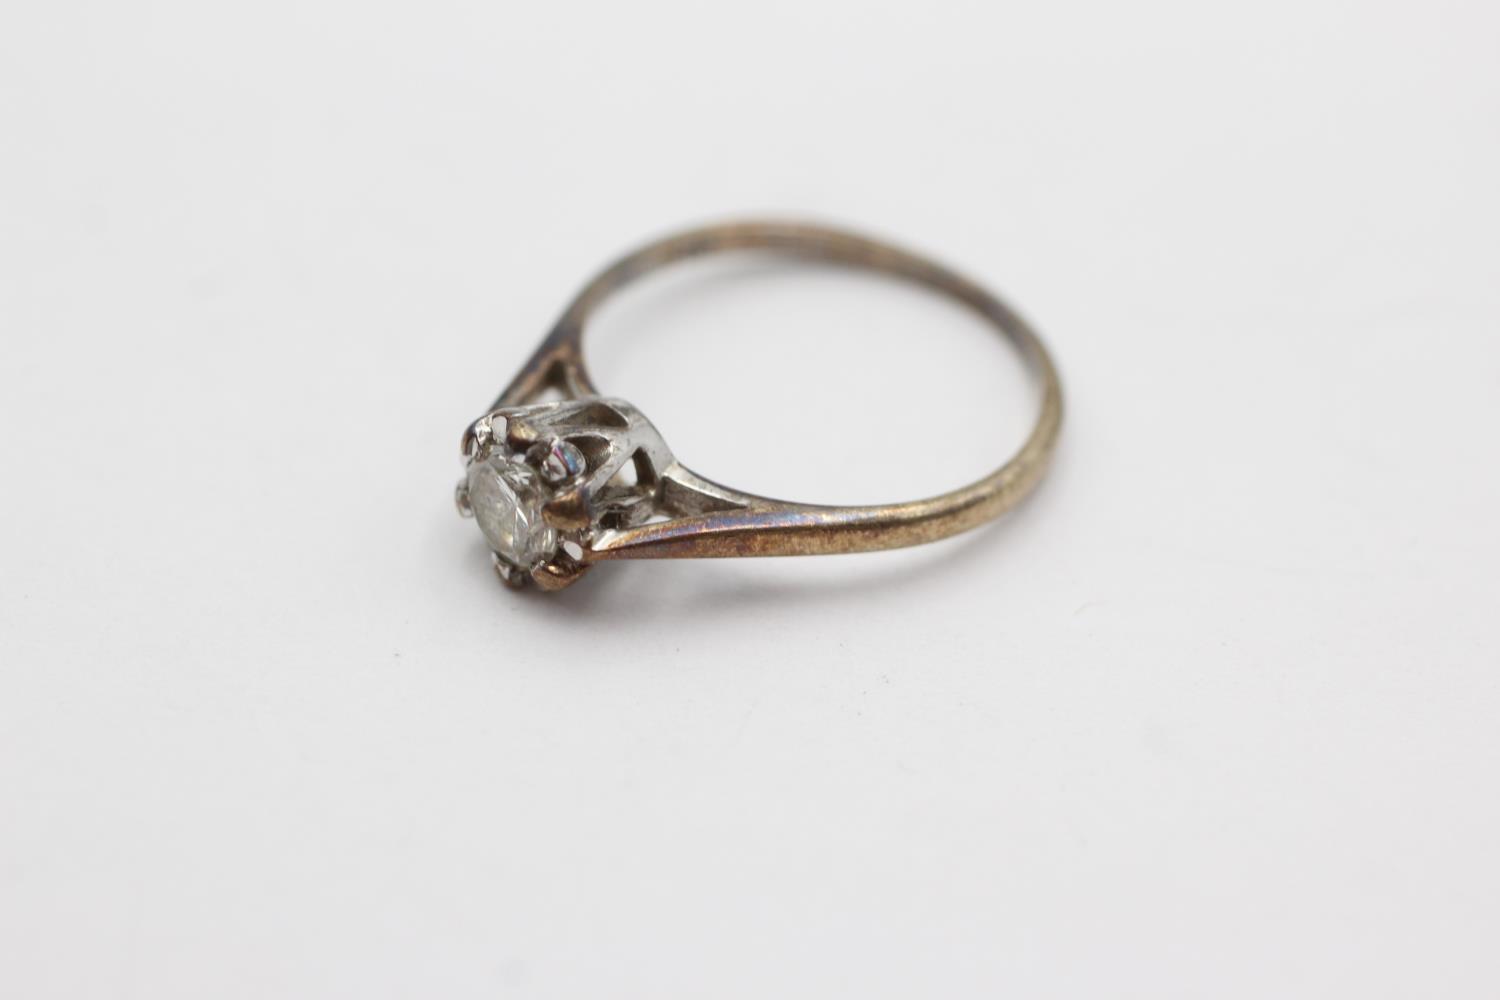 9ct gold diamond solitaire ring (1.9g) Size L - Image 3 of 4